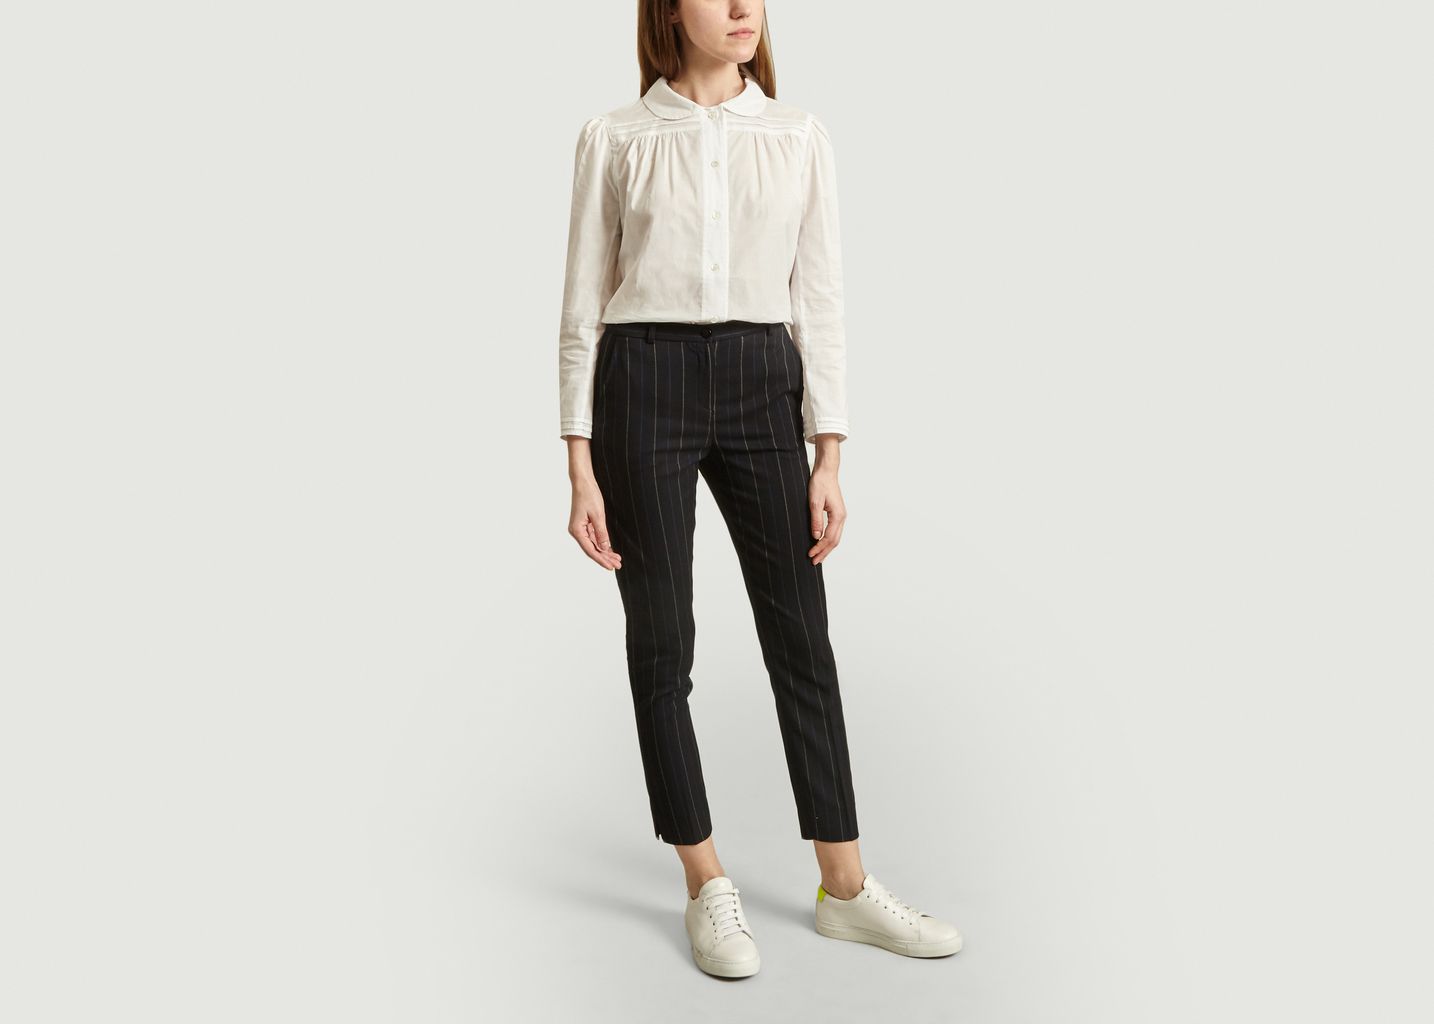 George tailored trousers with tennis stripes - Admise Paris